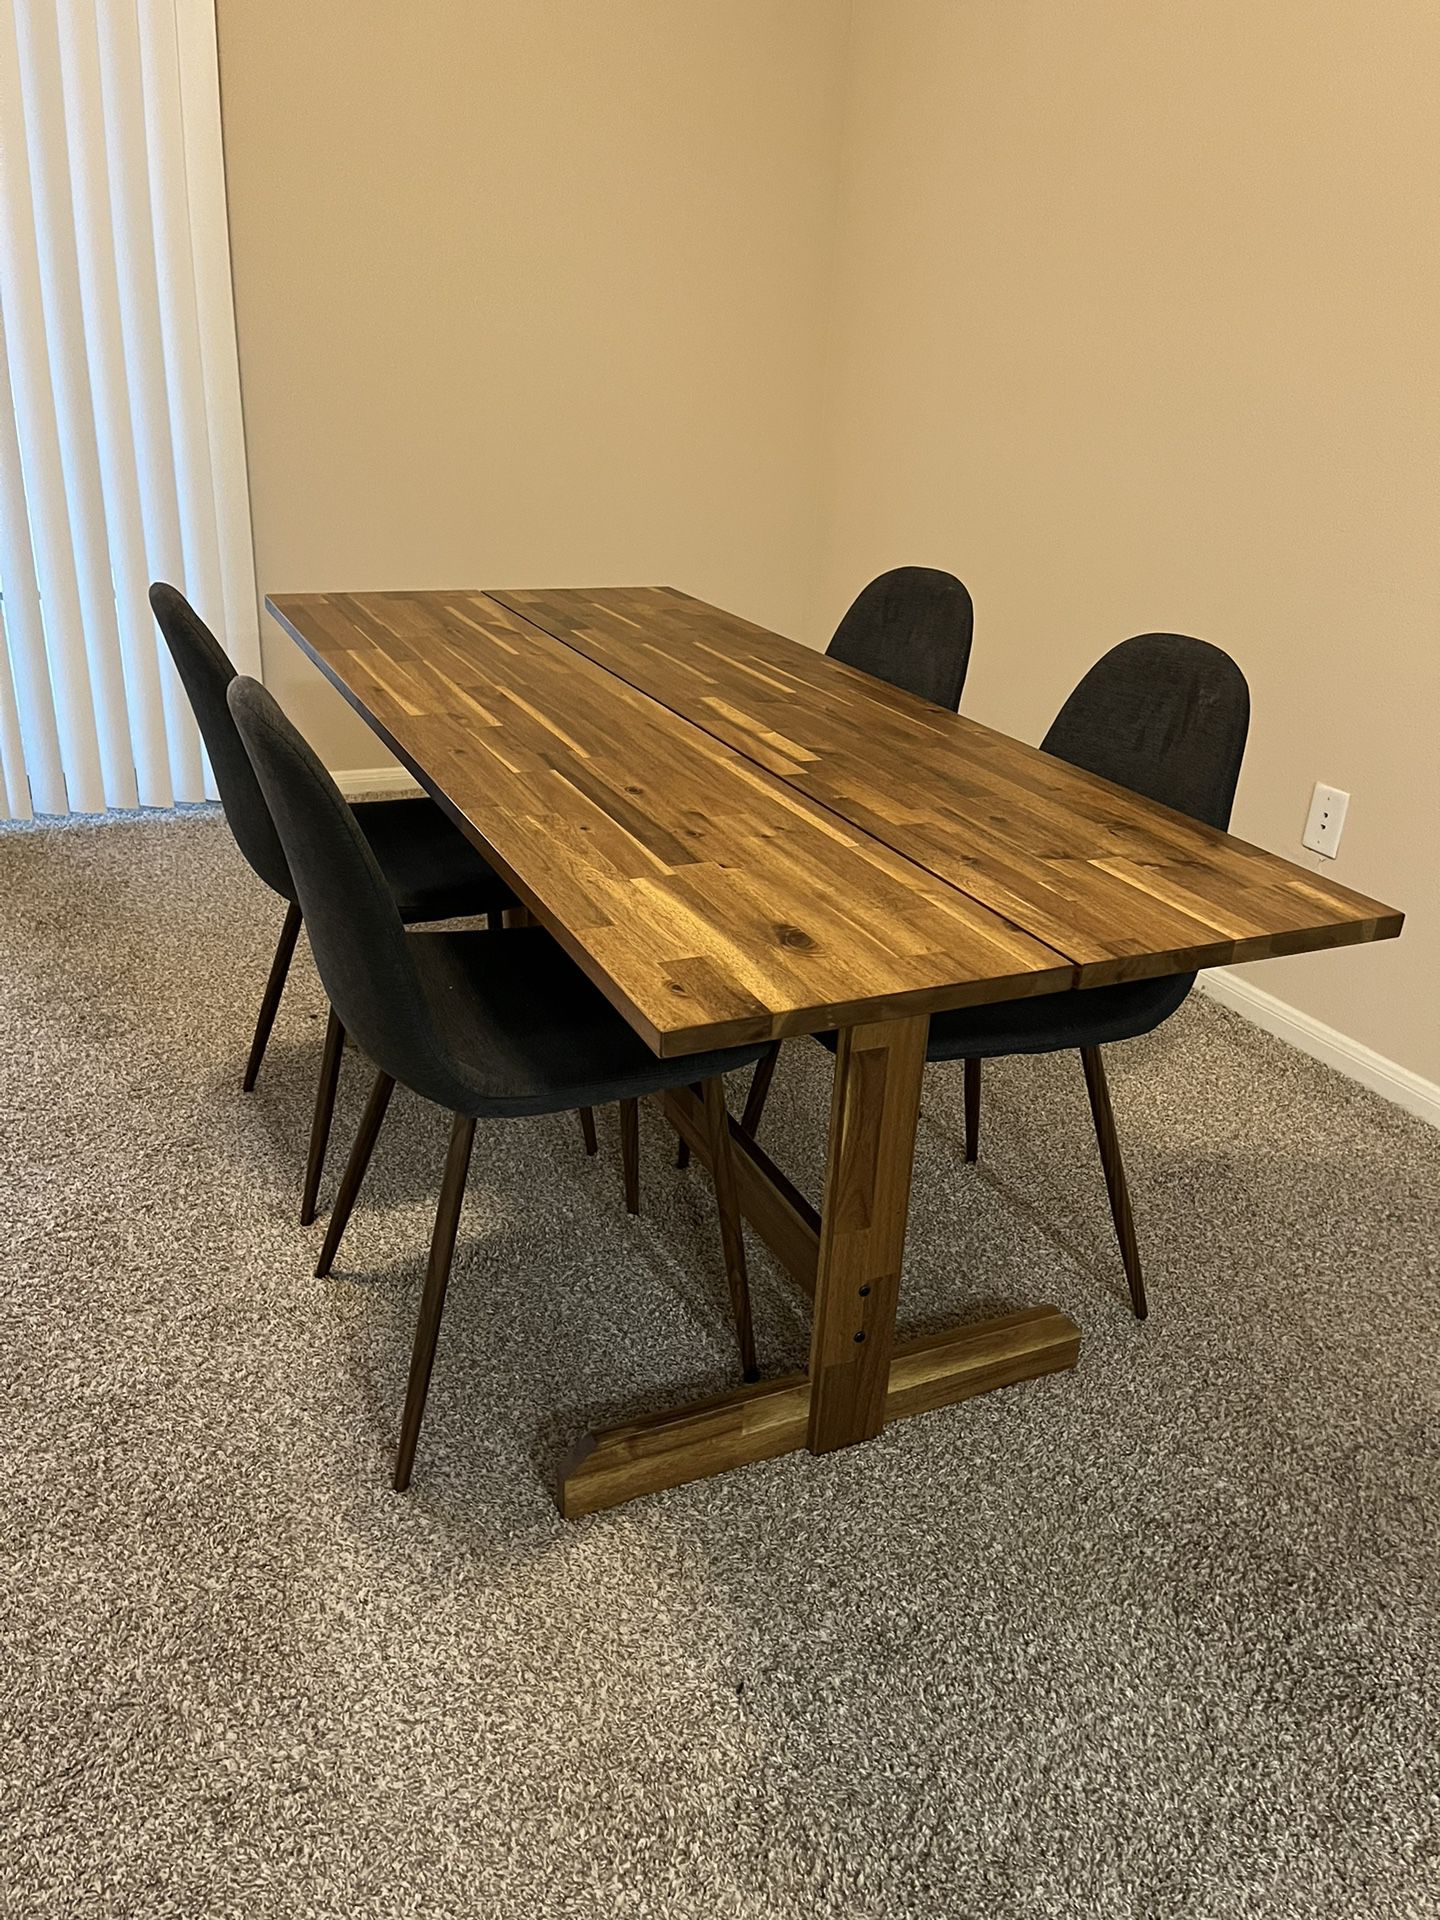 Dining Table Only (Ikea NACKANÄS) - 55” x 30”